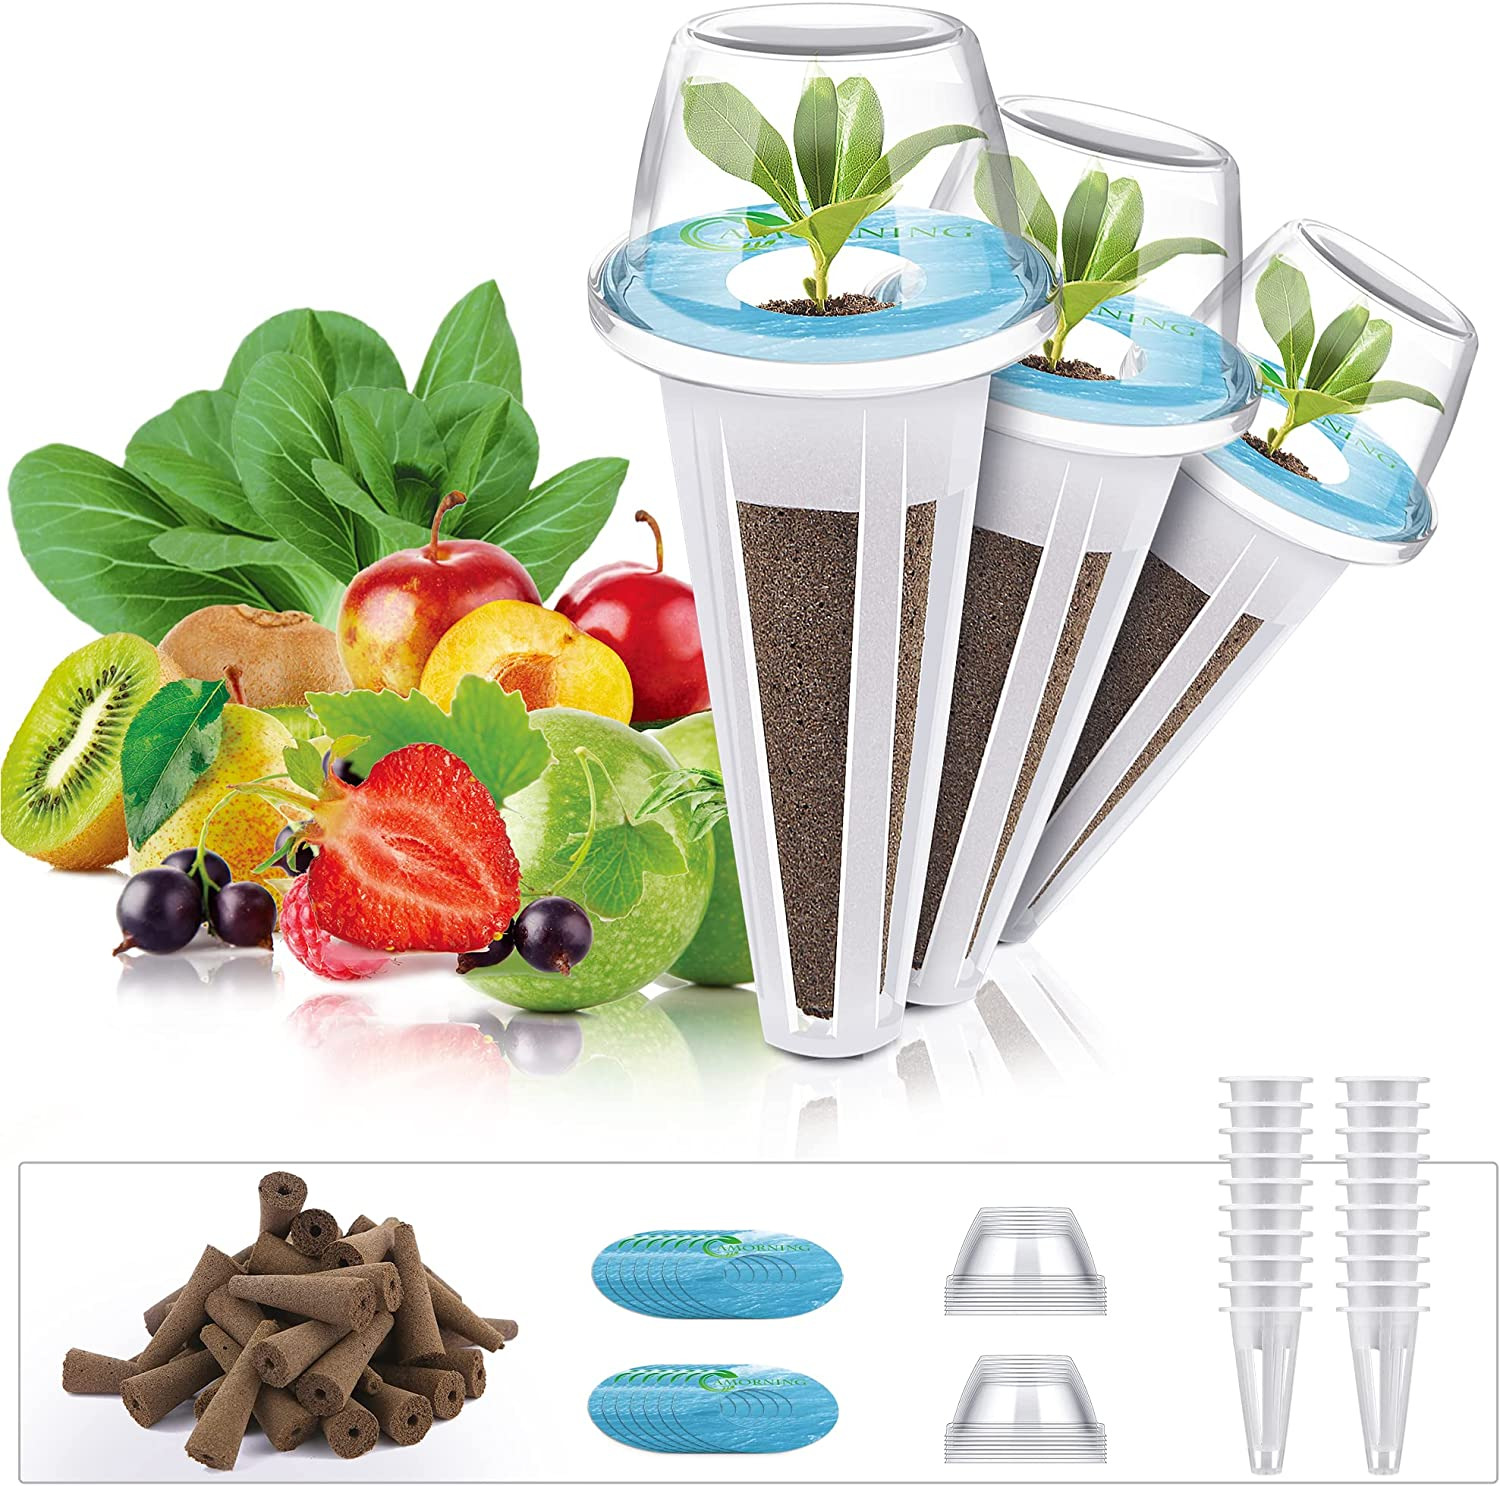 15 Grow Domes,15 Pod Labels,15 Grow Bla-Hydroponic-Garden System Seed-Pods Kit